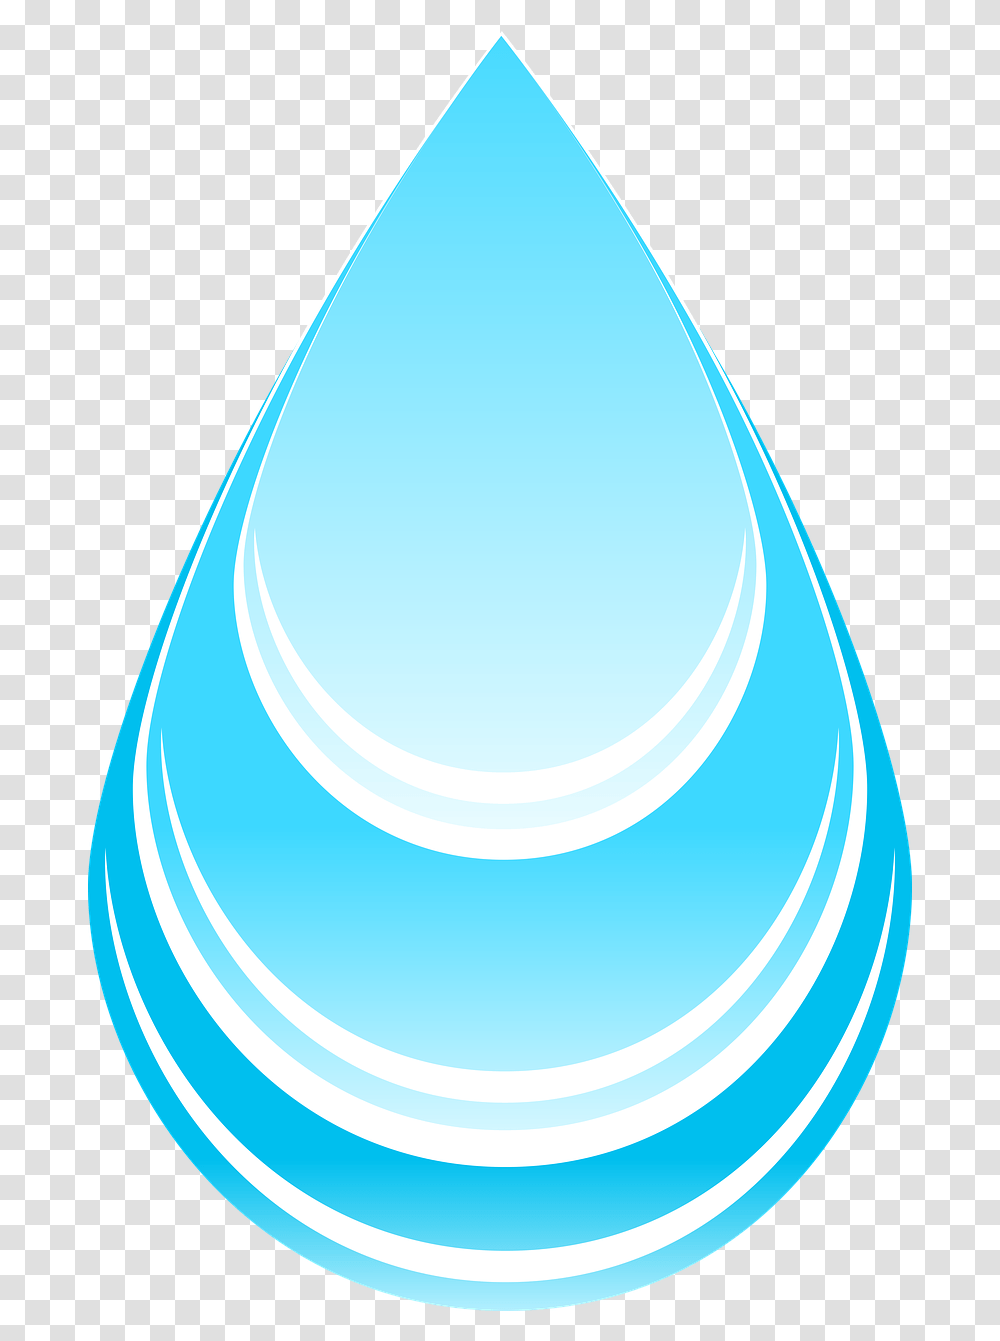 Raindrop Water Blue Free Image On Pixabay Regndrbe, Droplet, Triangle, Cone, Bowl Transparent Png